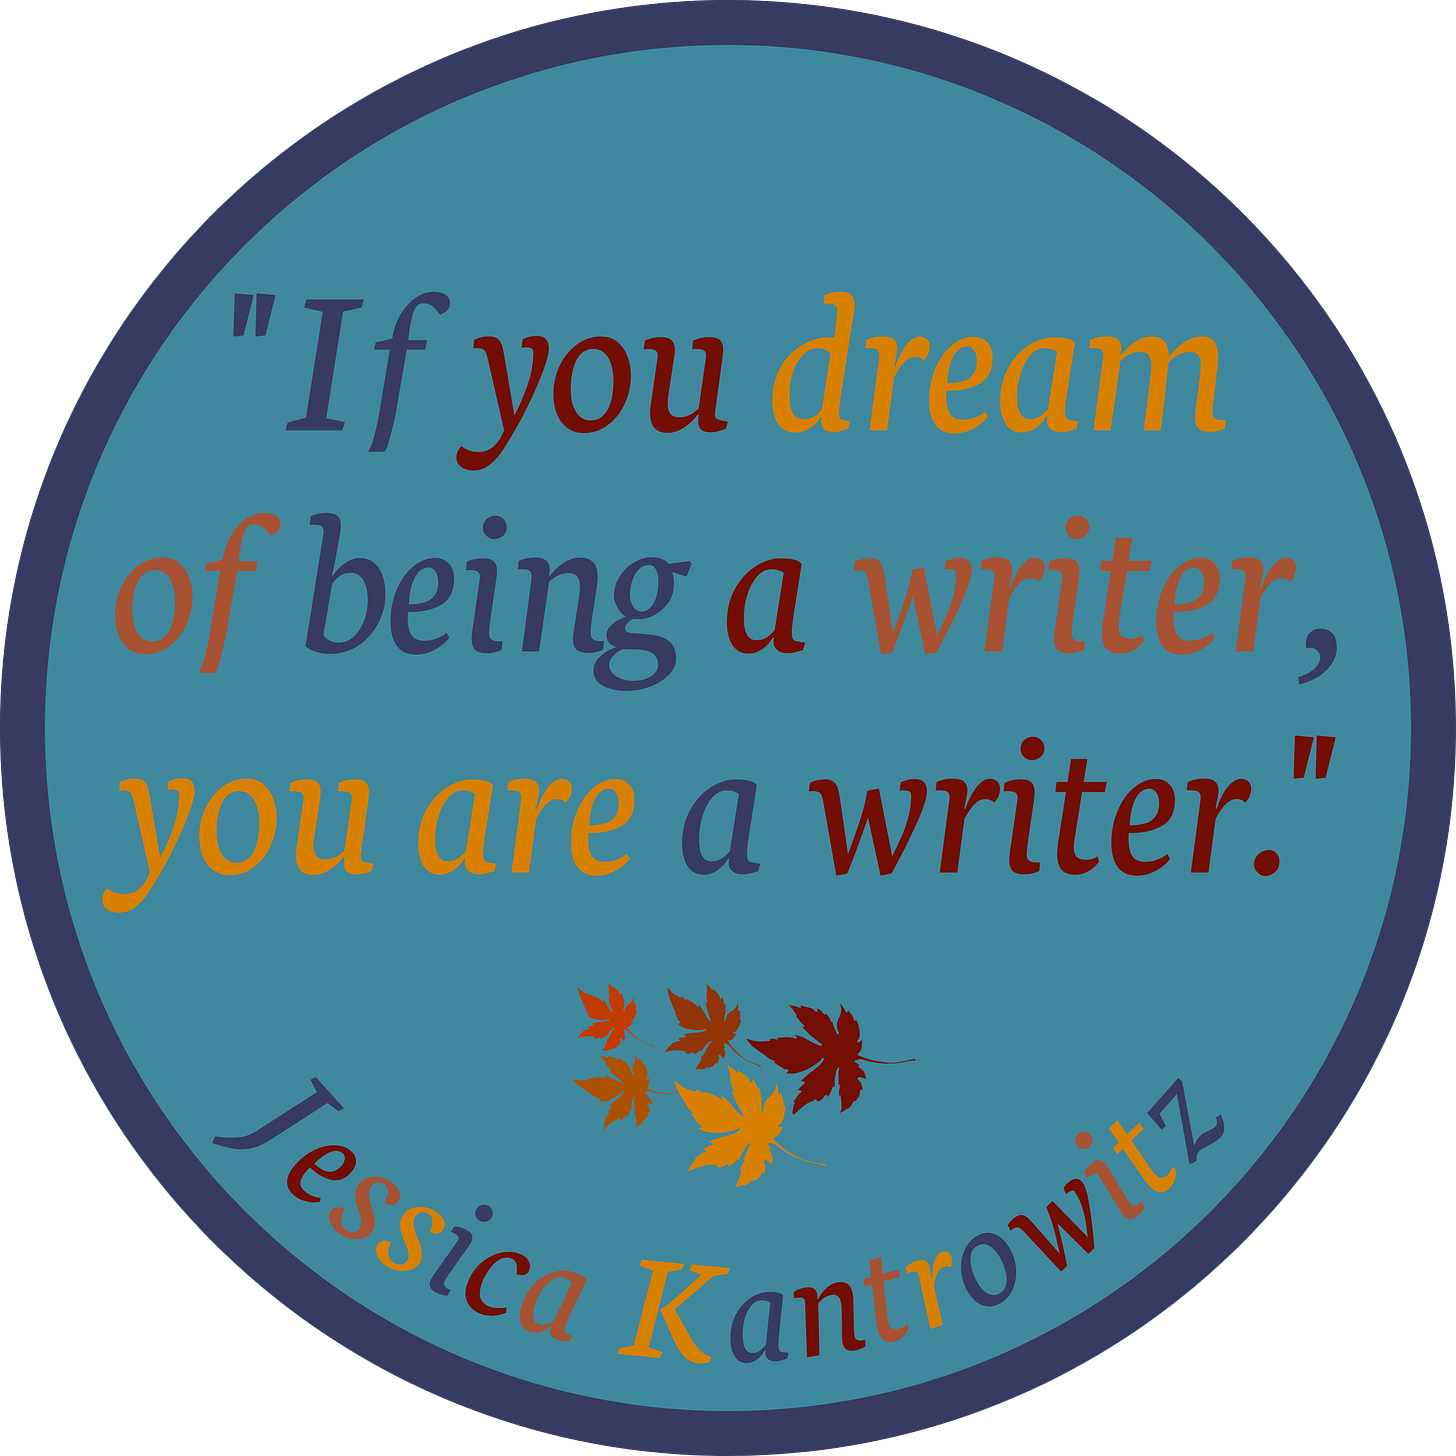 A graphic with autumn leaves and a light blue circle and red, blue, and orange text that reads, "If you dream of being a writer, you are a writer. Jessica Kantrowitz."